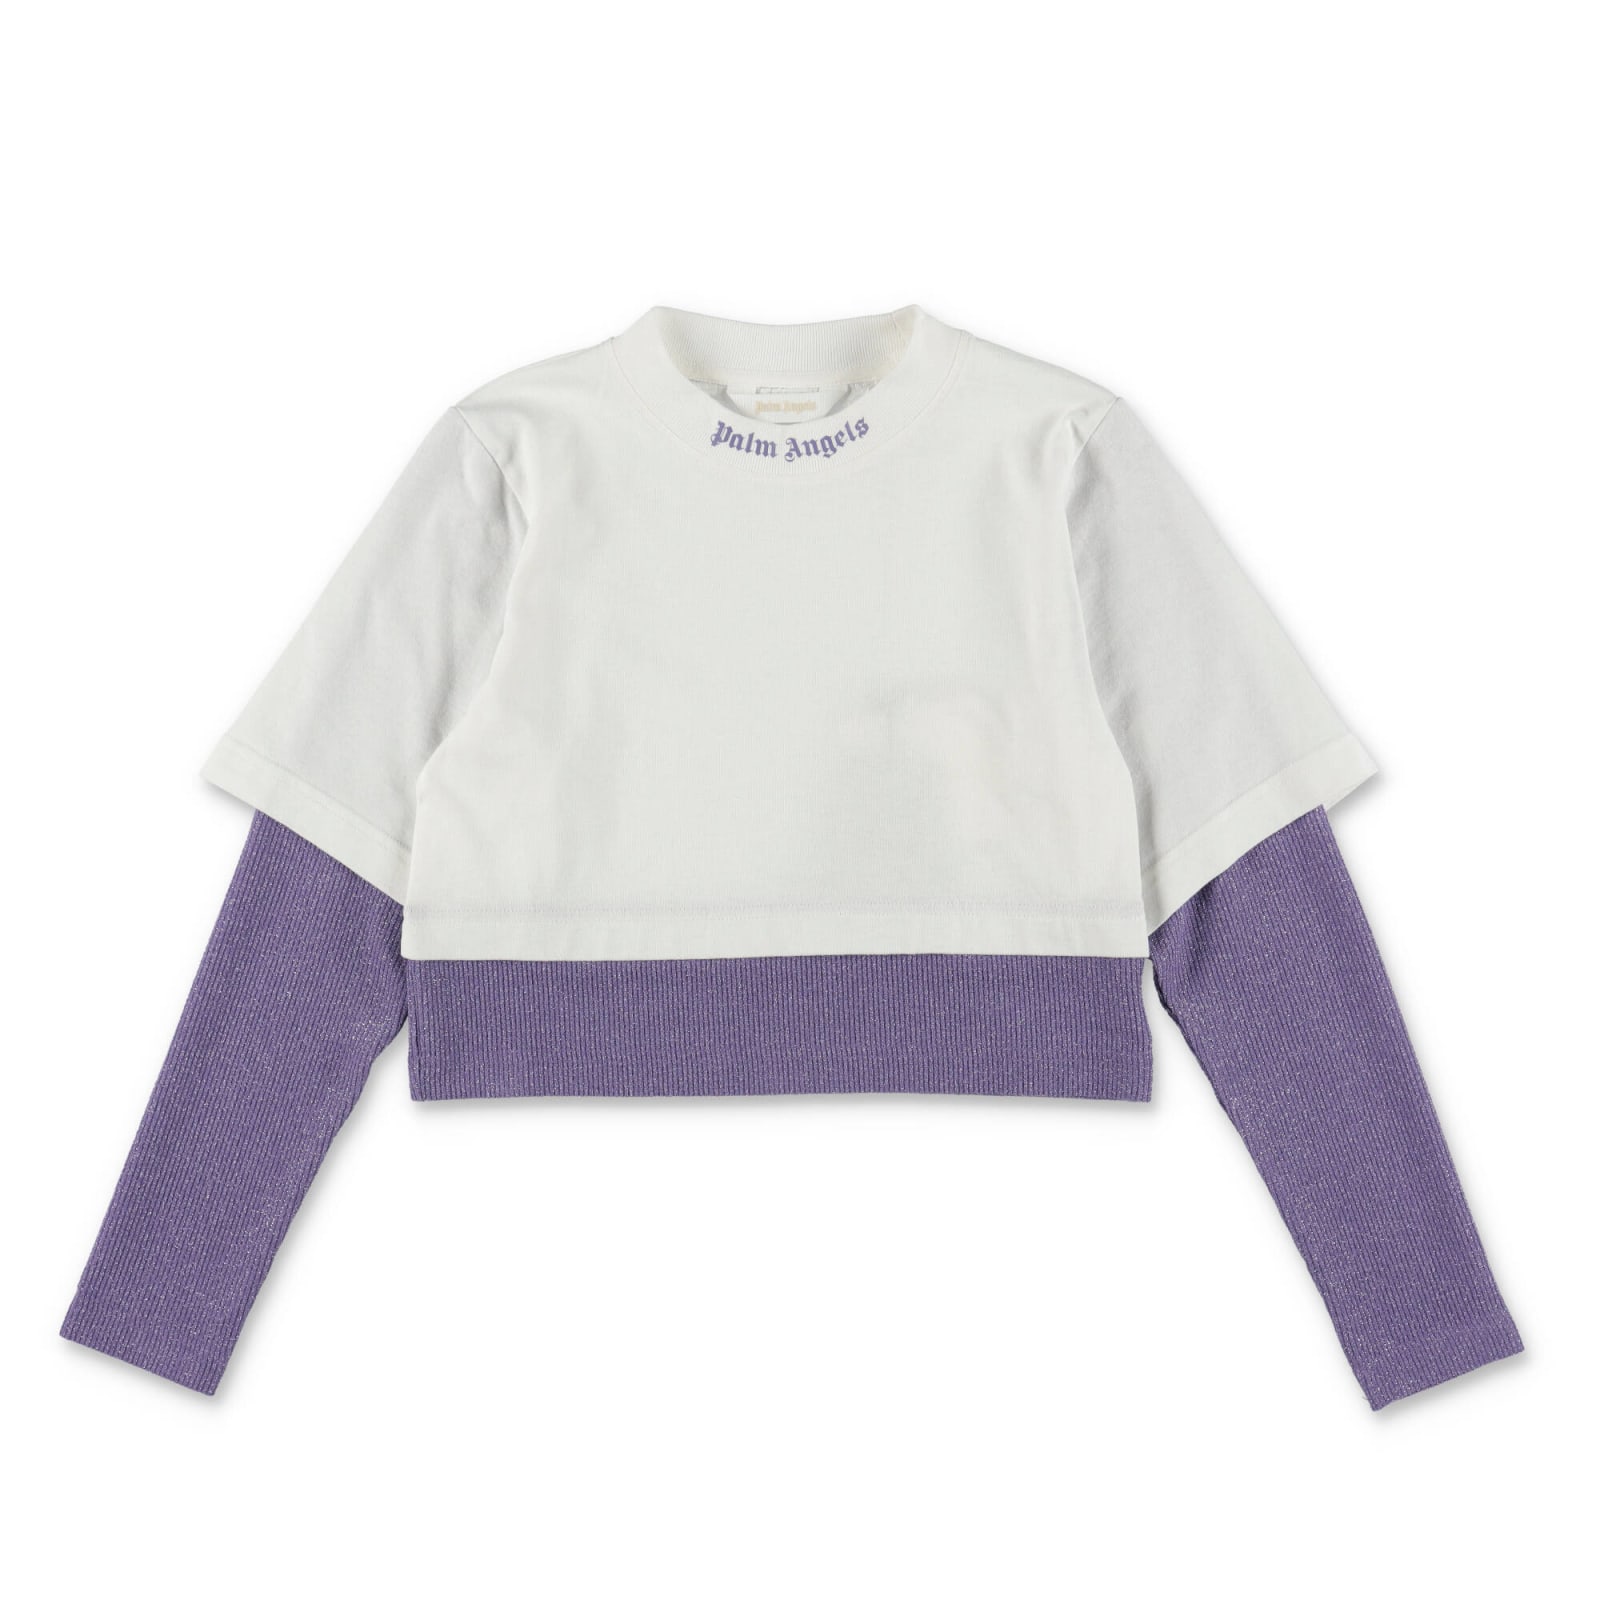 Palm Angels Kids'  T-shirt Bianca Effetto Sovrapposto In Jersey Di Cotone Bambina In Bianco